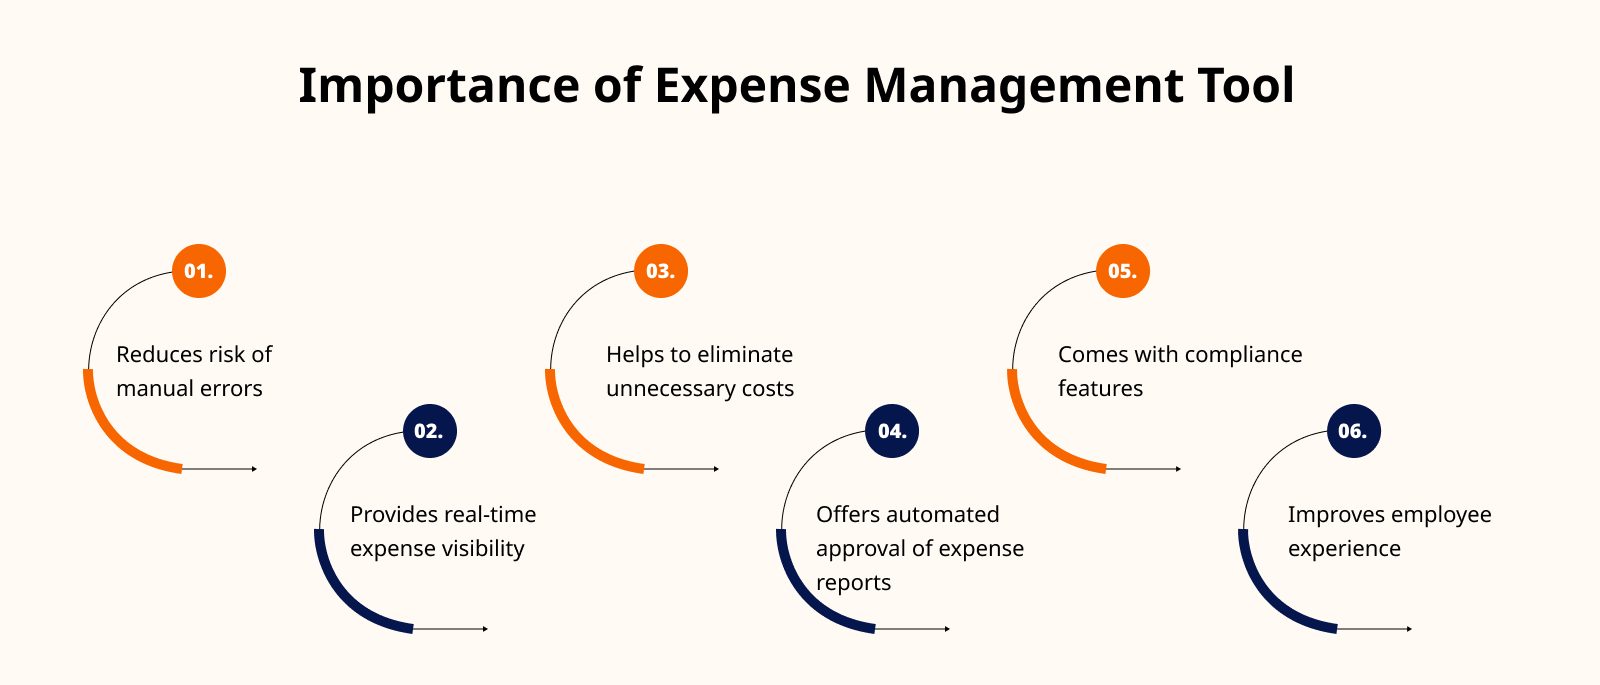 Importance of Expense Management Tool